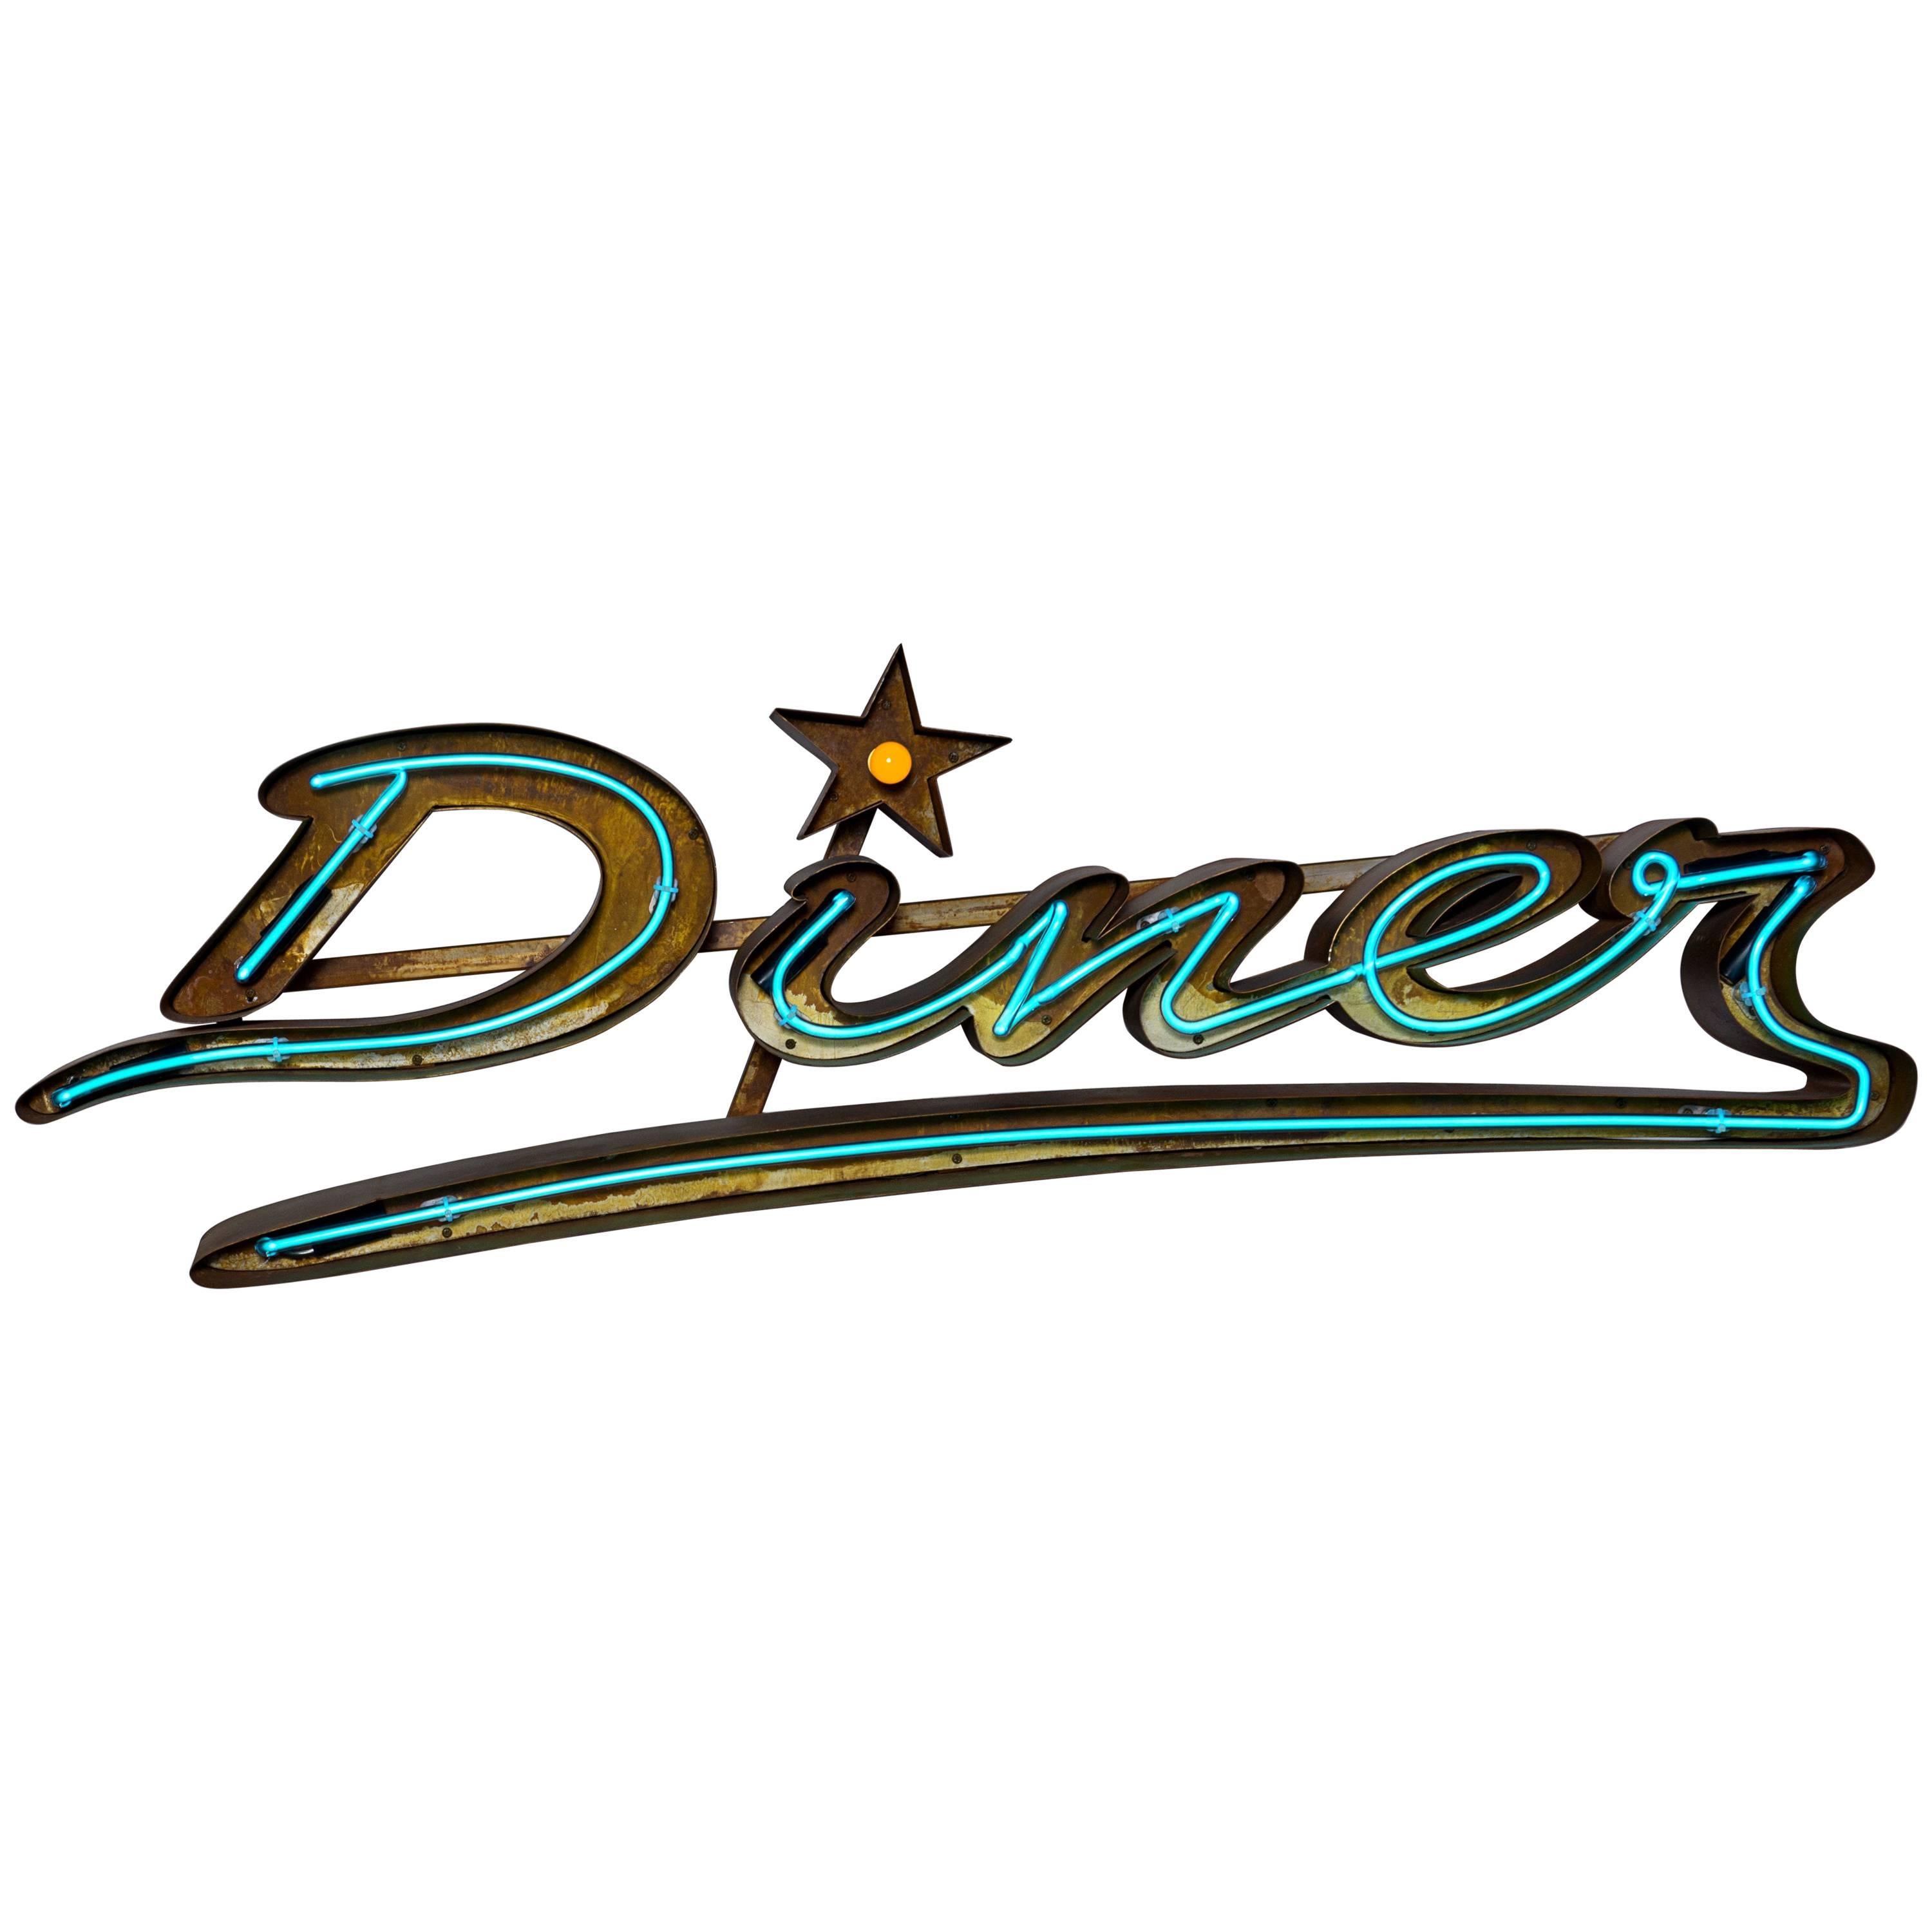 Diner Turquoise Neon Encased in Reclaimed Metal by Gods Own Junkyard For Sale